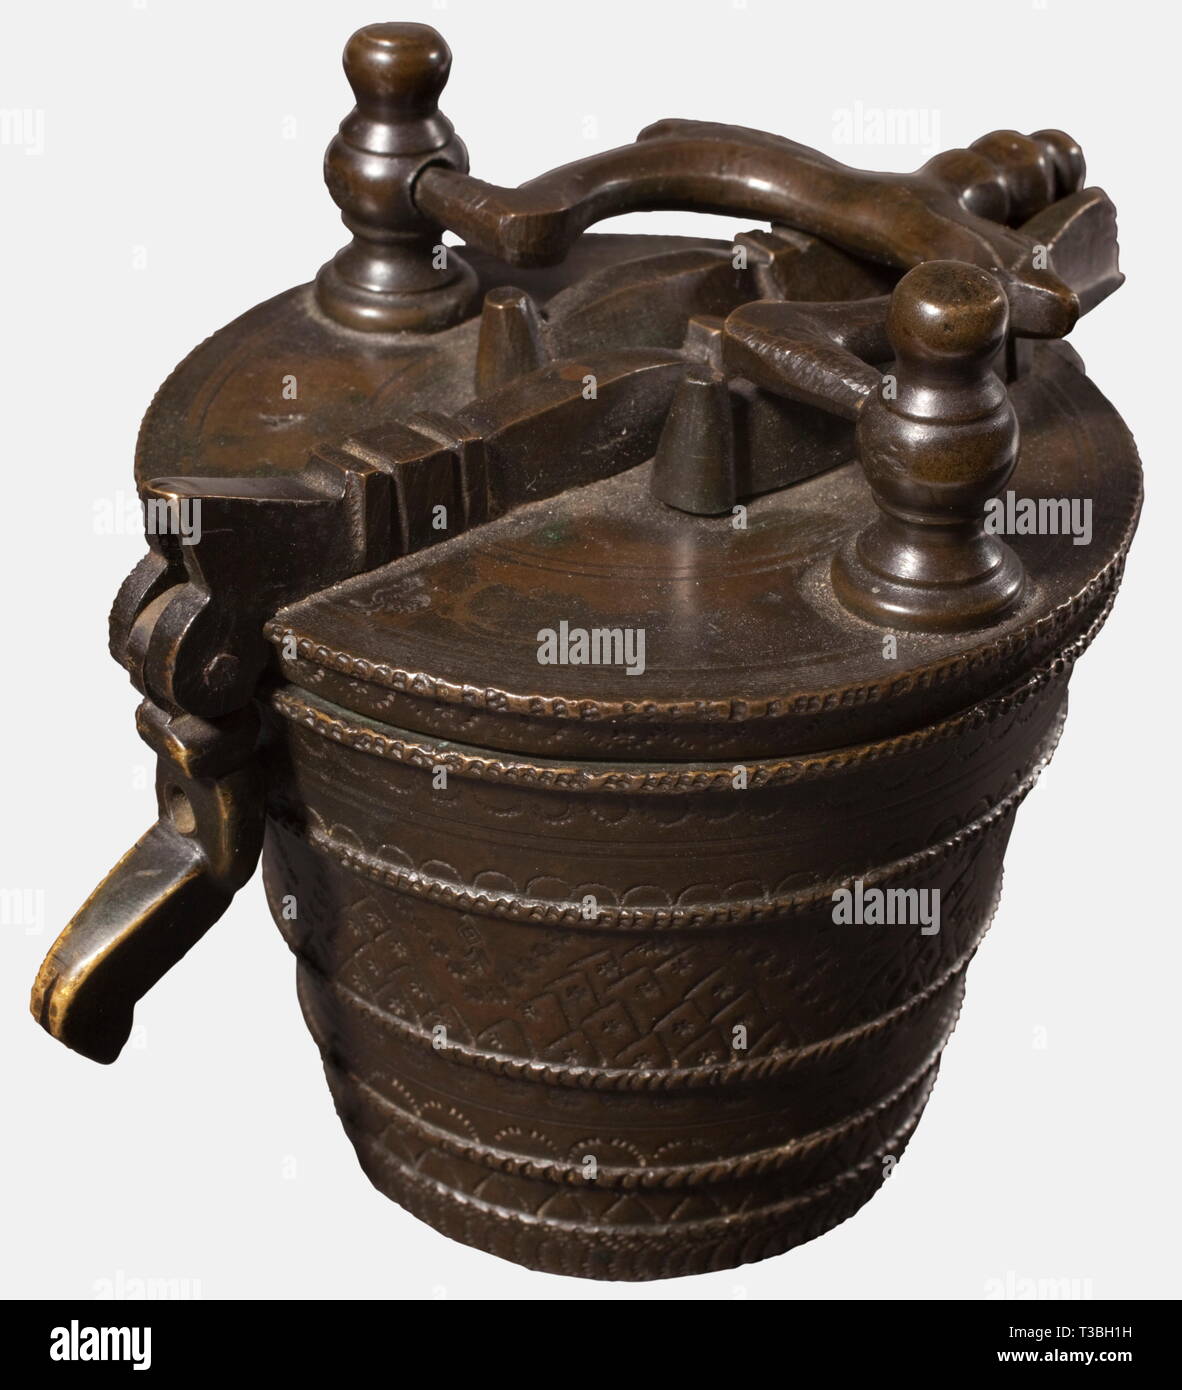 A nest-of-weights of 8 pounds, Nuremberg, 2nd half of the 18th century Brass with dark age patina. Conical casing with richly punched decorations. Hinged lid with closure lever and movable carrying handle. The inside fitted with eight out of originally ten stackable weights, the smallest weight probably associated. The lid punched '8' (pound) 'A' (Austria) along with the rooster mark of a Nuremberg founder. The casing marked with '4' on the inside, as well as an Austrian eagle mark. The insert weights of 2 and 1 pound, 16, 8, 4, 2 and 1 ounces. T, Additional-Rights-Clearance-Info-Not-Available Stock Photo